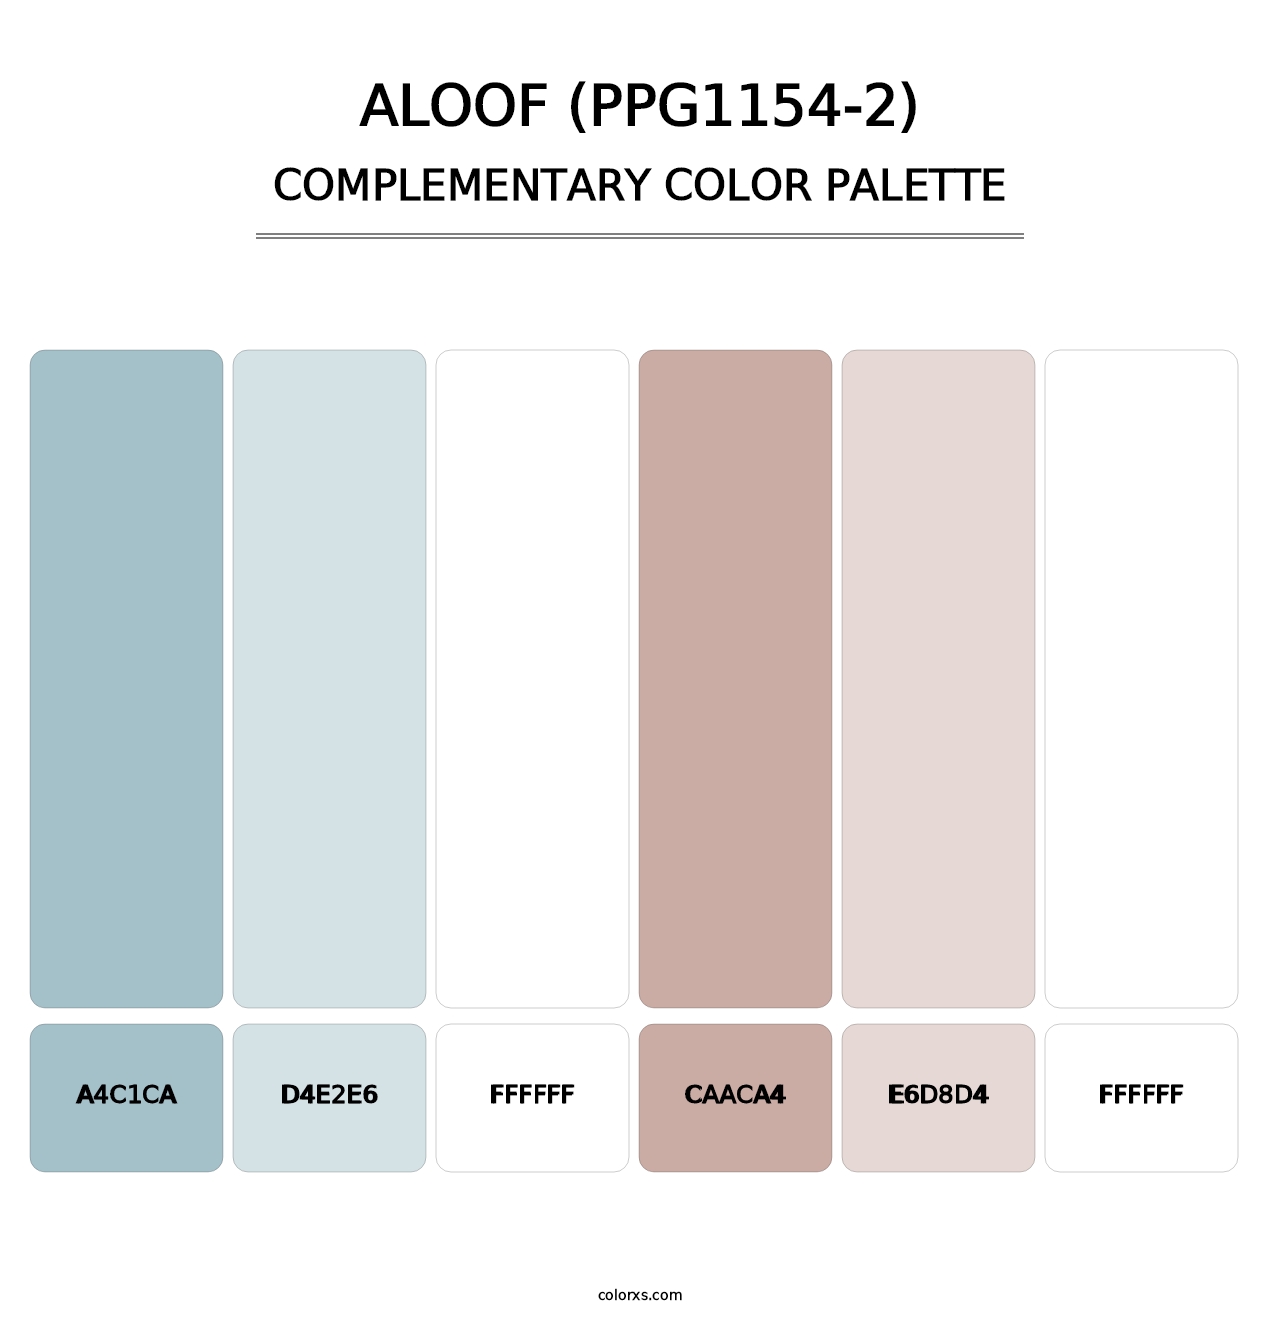 Aloof (PPG1154-2) - Complementary Color Palette